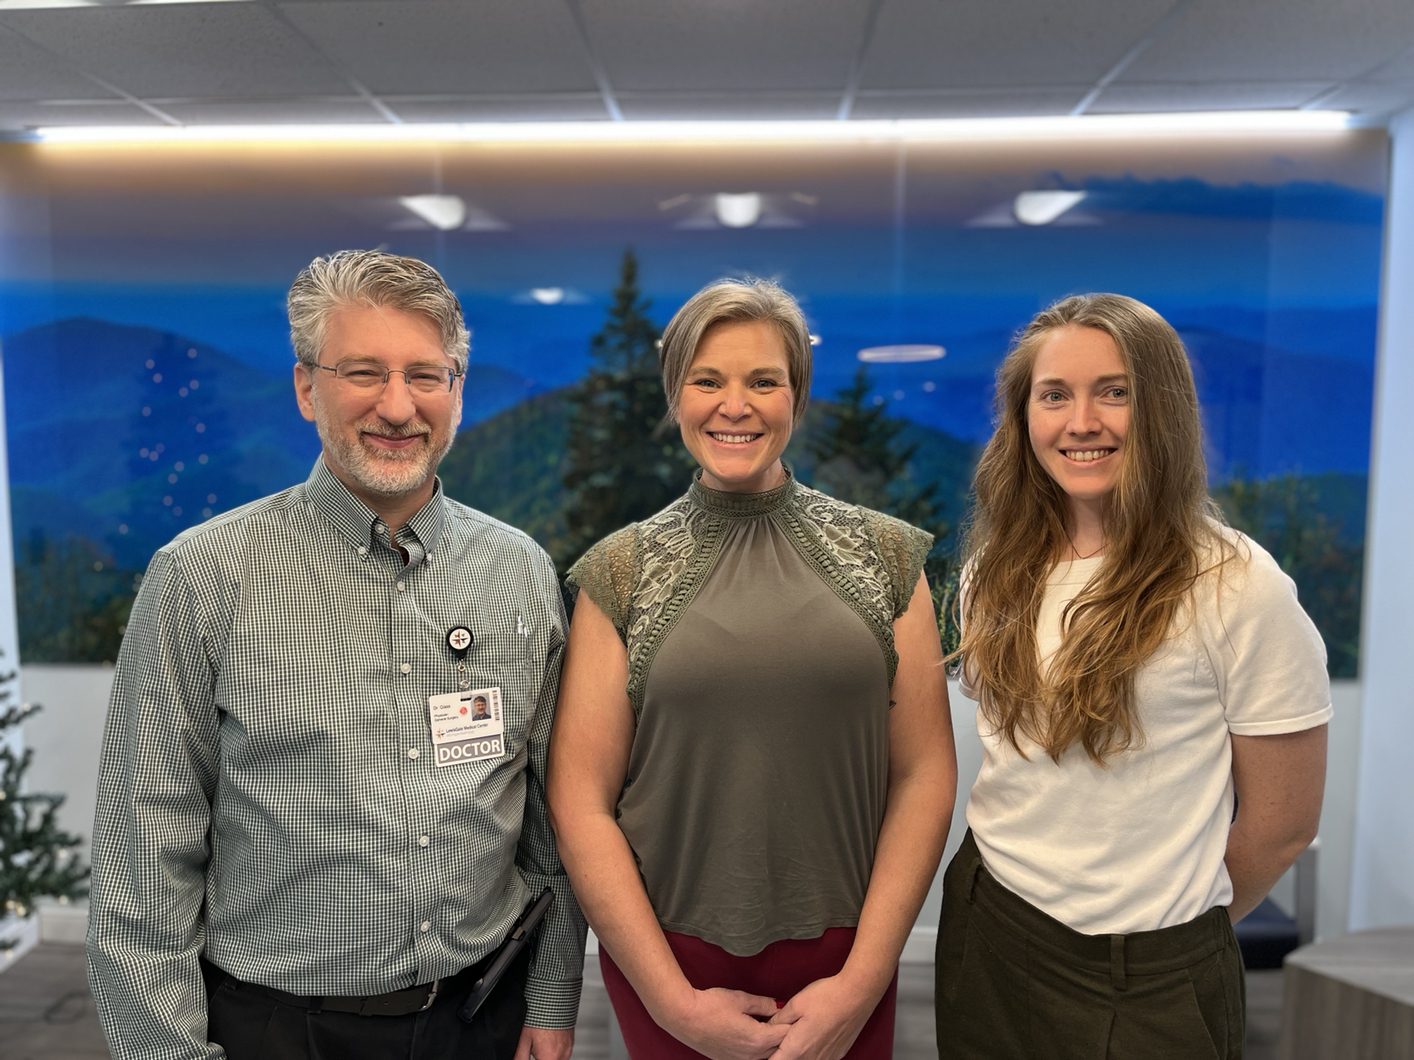 (L to R): Darren Glass, MD, board-certified general and bariatric surgeon; Franci Sifers, MSN, RN, bariatric coordinator; and Kelleigh O'Toole, RD, bariatric dietitian.